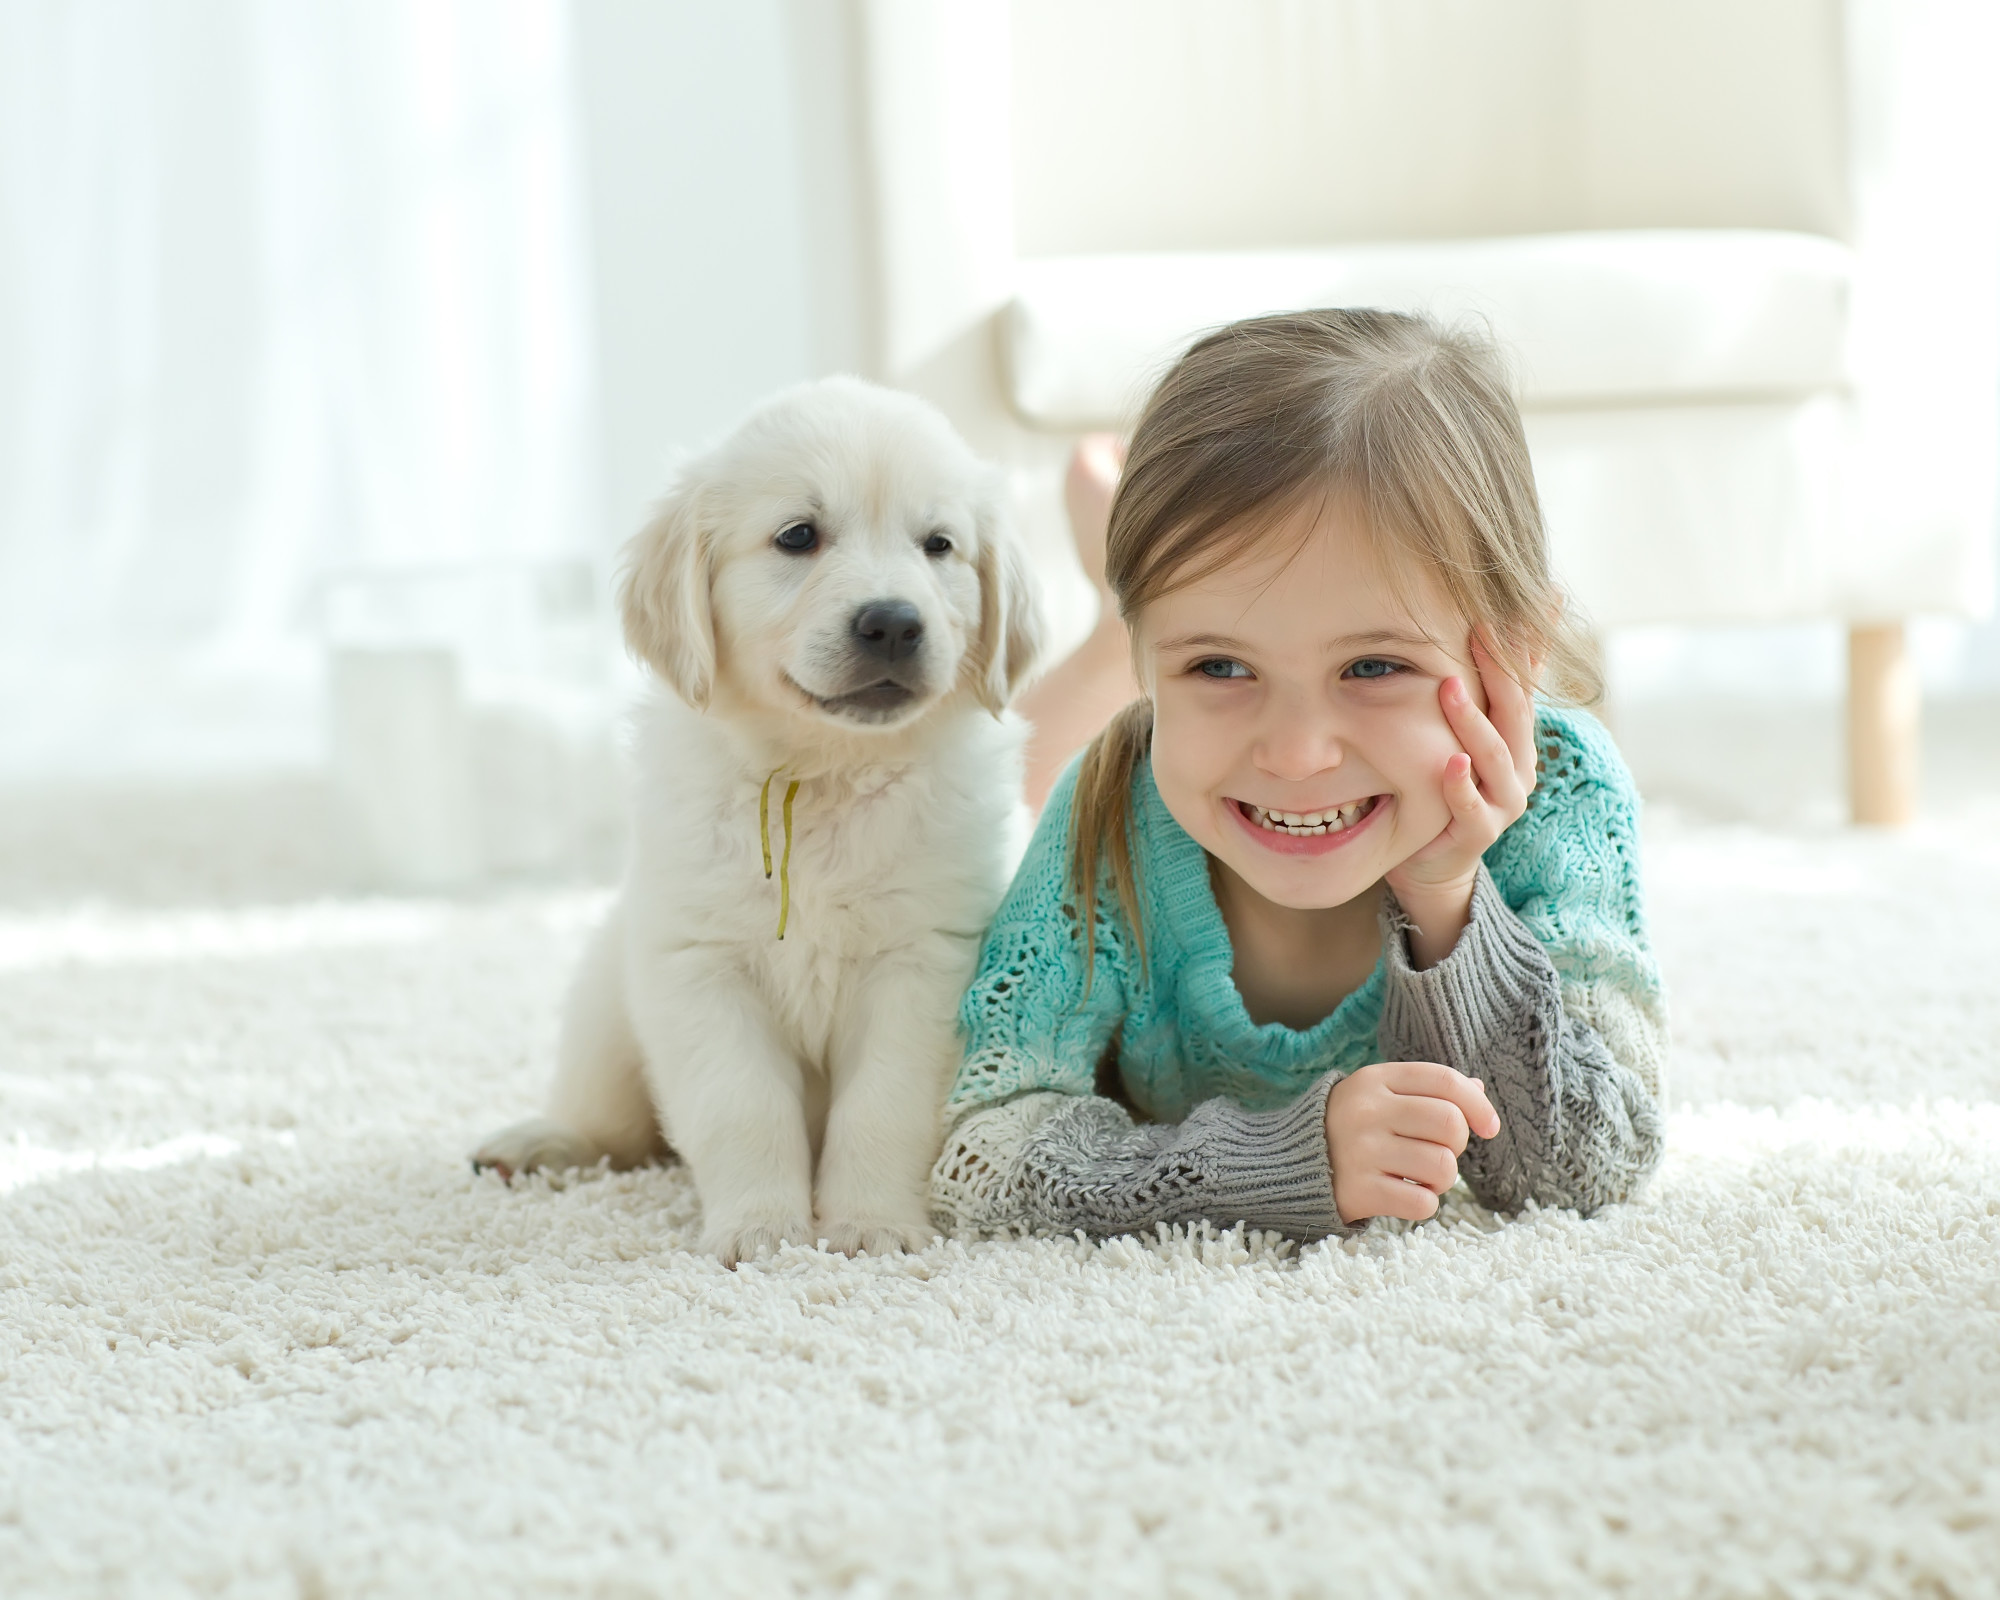 A new dog can bring so much joy into your home. But if this is your first dog, you’ll need to prepare. Here are 6 essentials your home needs for your first dog.